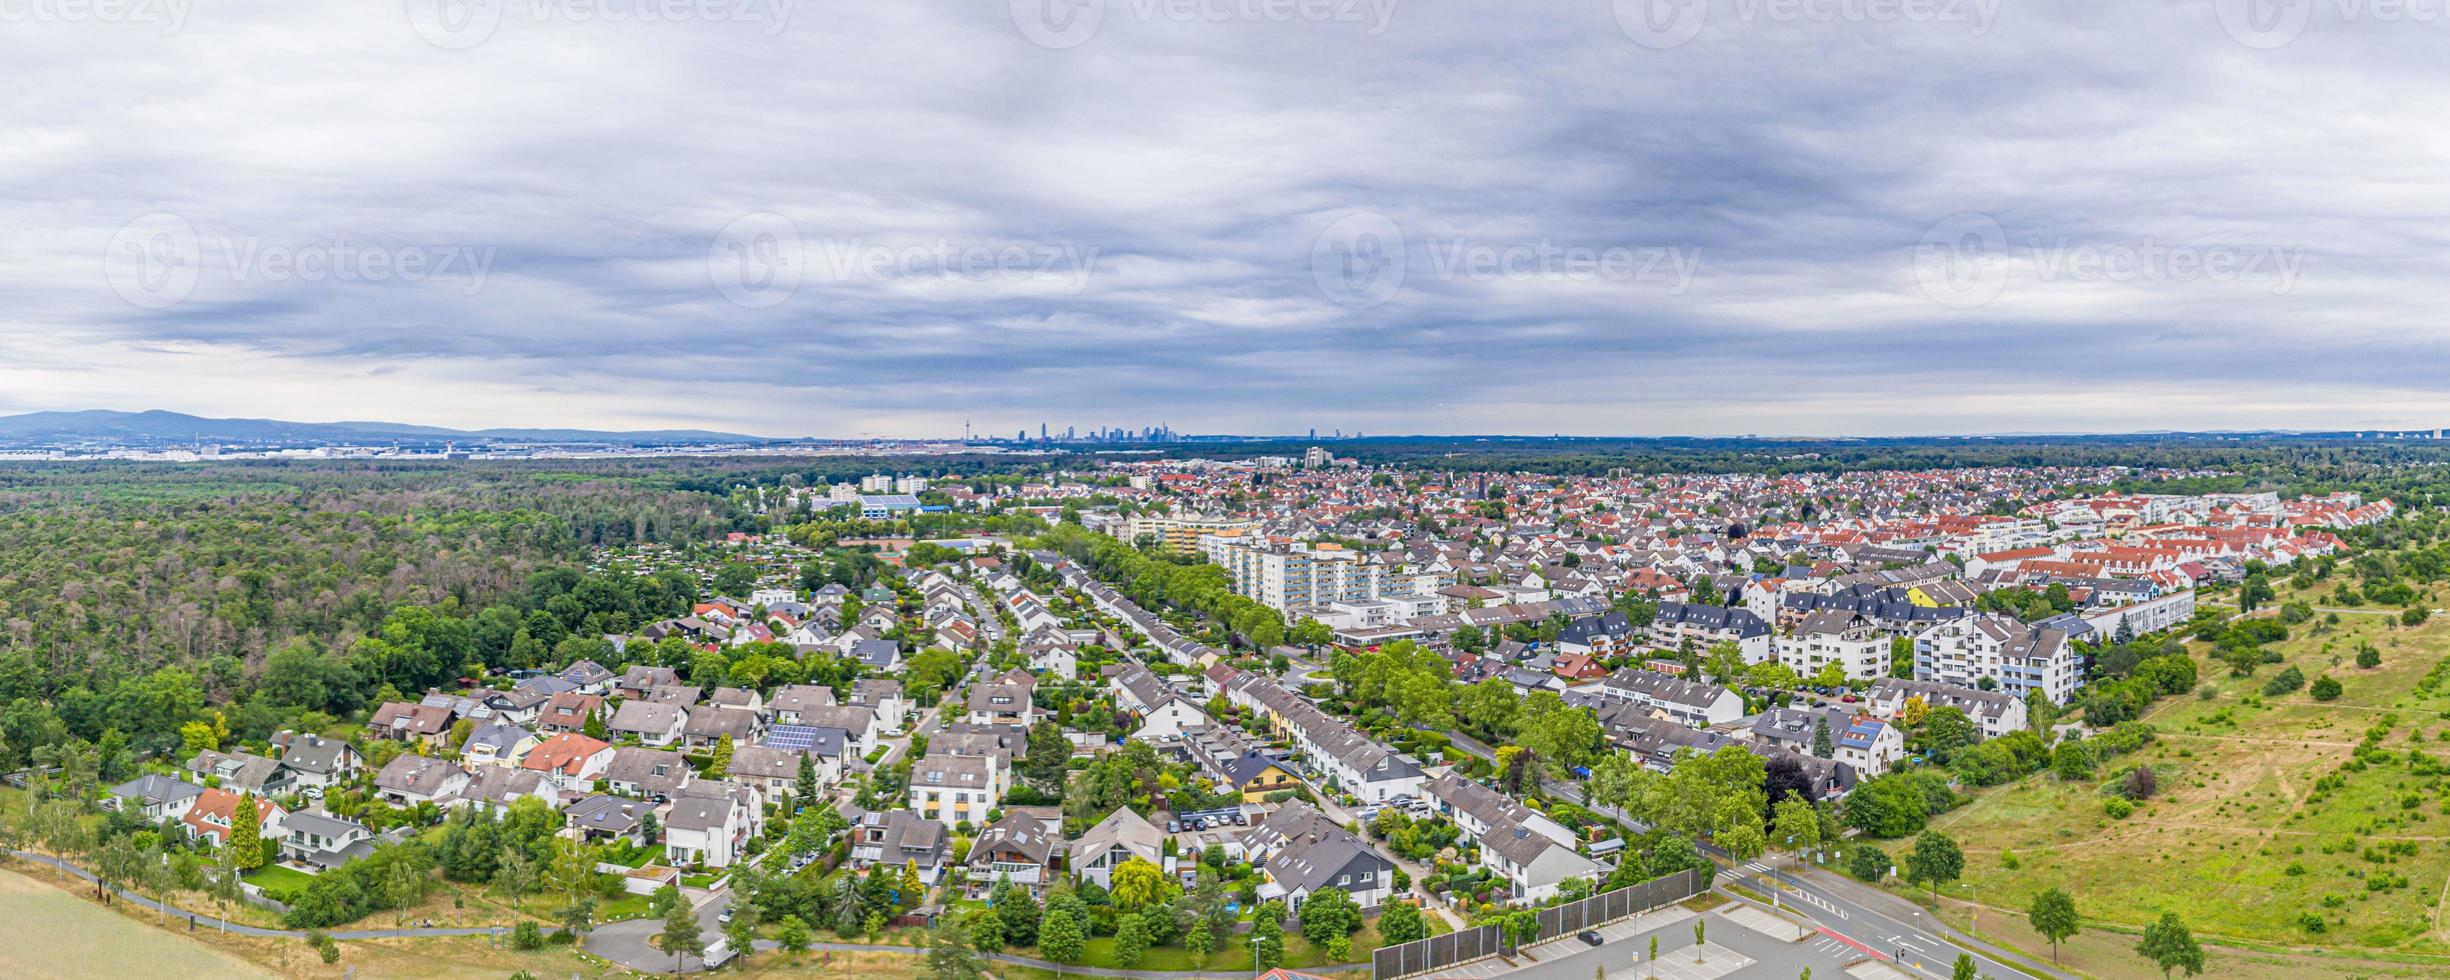 Panoramic drone picture of the German town of Moerfelden-Walldorf photo